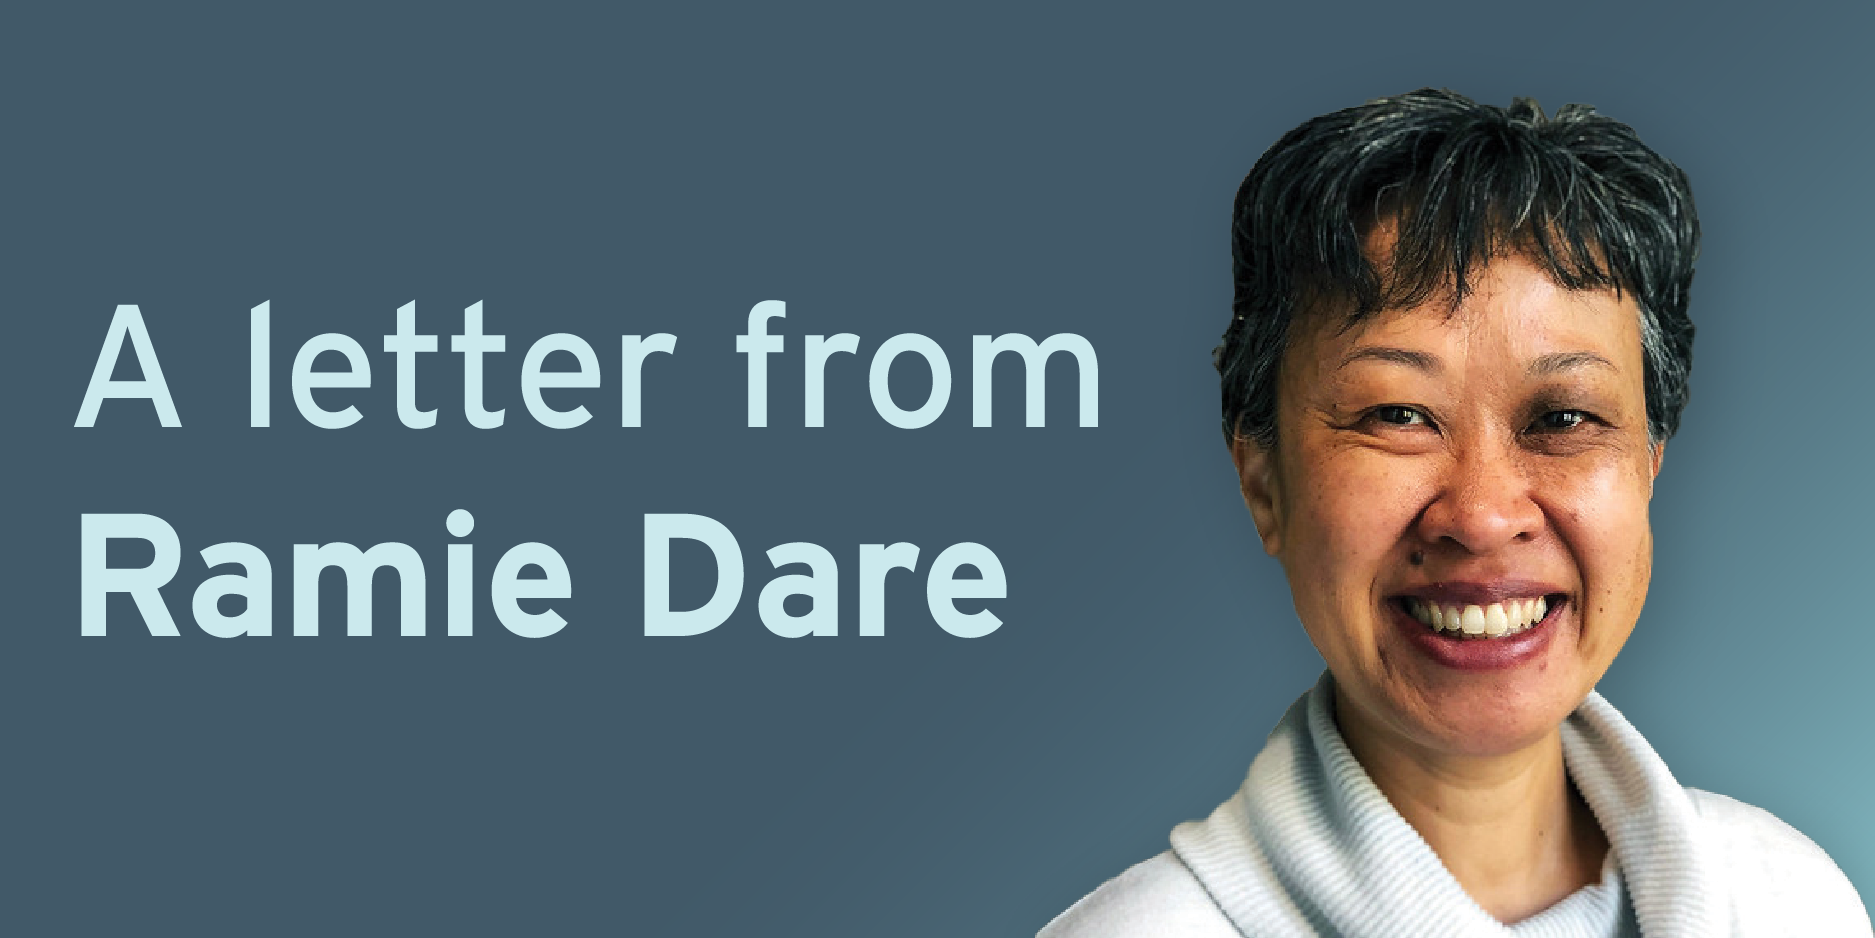 A headshot of Ramie Dare against a blue backdrop, with the title "A letter from Ramie Dare"